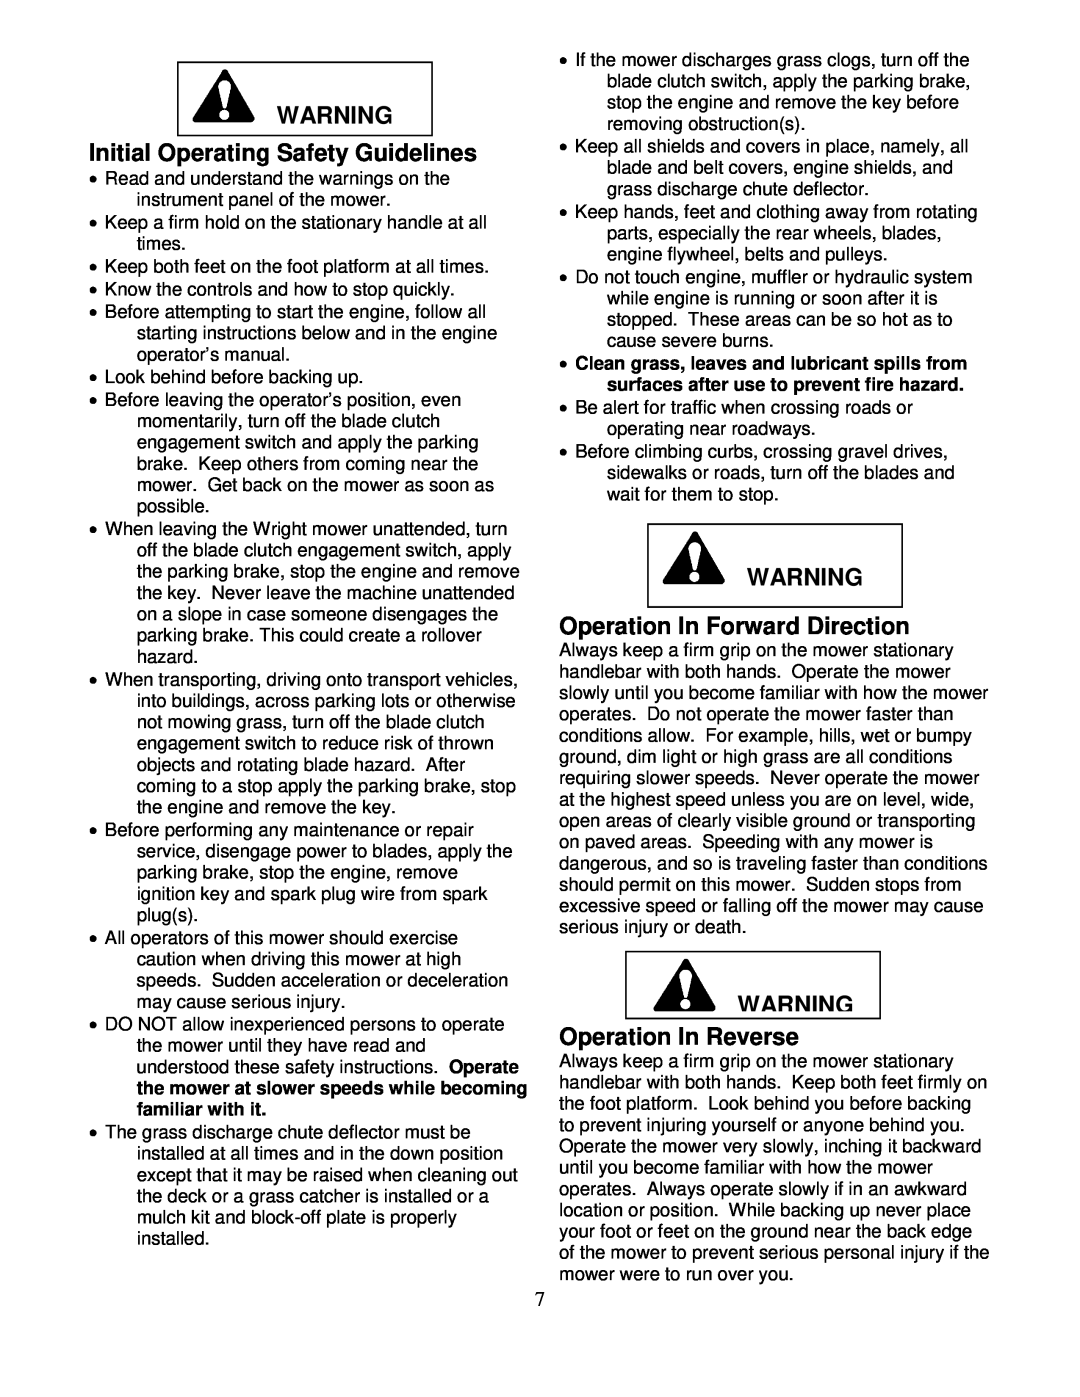 Wright Manufacturing 14SH654 Initial Operating Safety Guidelines, Operation In Forward Direction, Operation In Reverse 